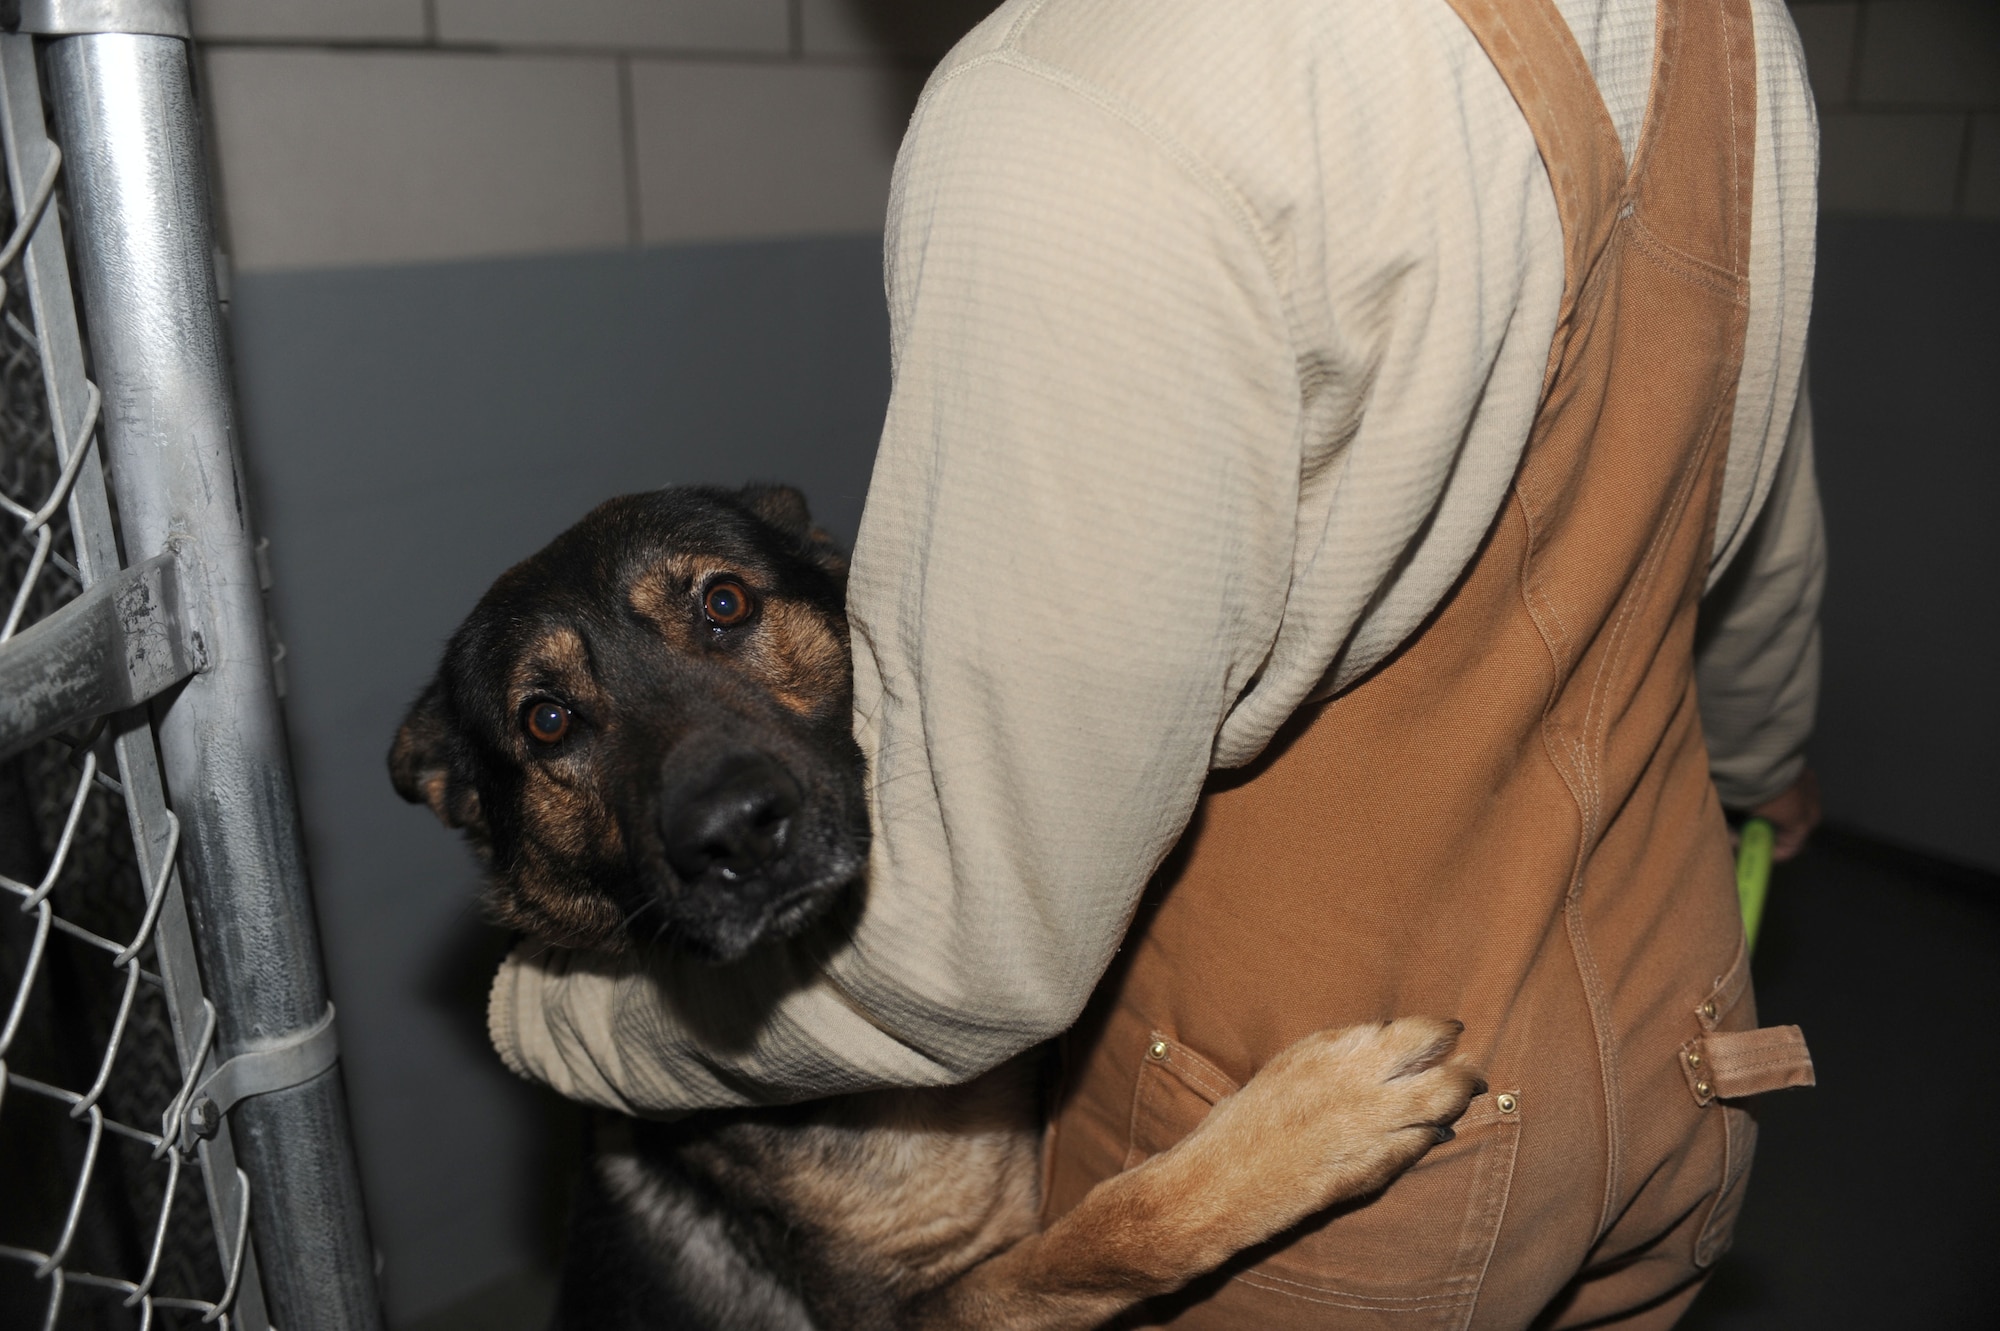 Batu, a military working dog assigned to the 28th Security Forces Squadron, clings to his handler while his kennel is cleaned at Ellsworth Air Force Base, S.D., Oct. 15, 2015. For health and safety purposes, kennels are sanitized every four hours and thoroughly cleaned at least once a week. (U.S. Air Force photo by Airman Sadie Colbert)